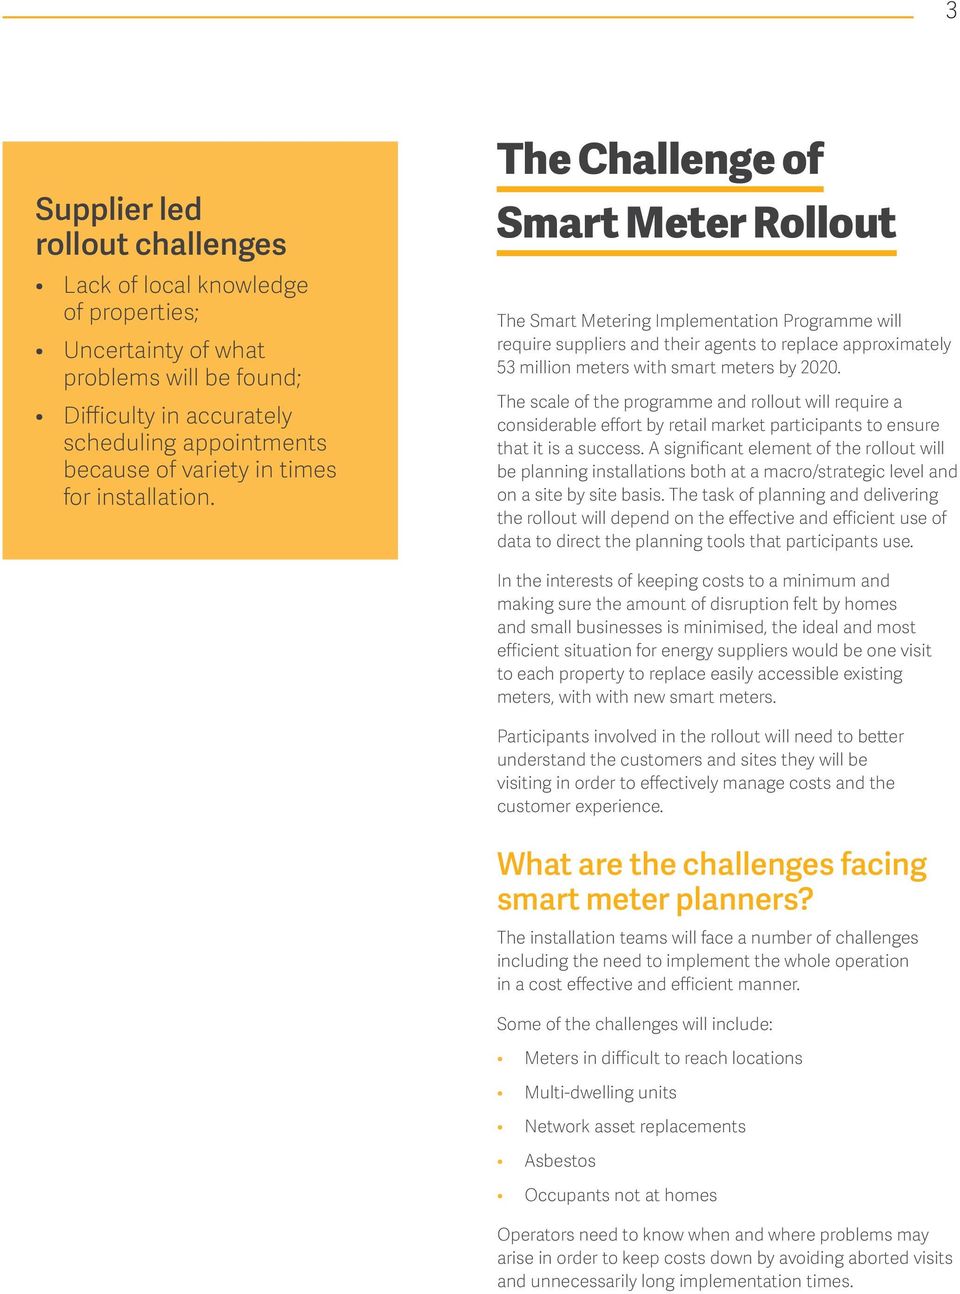 The Challenge of Smart Meter Rollout The Smart Metering Implementation Programme will require suppliers and their agents to replace approximately 53 million meters with smart meters by 2020.